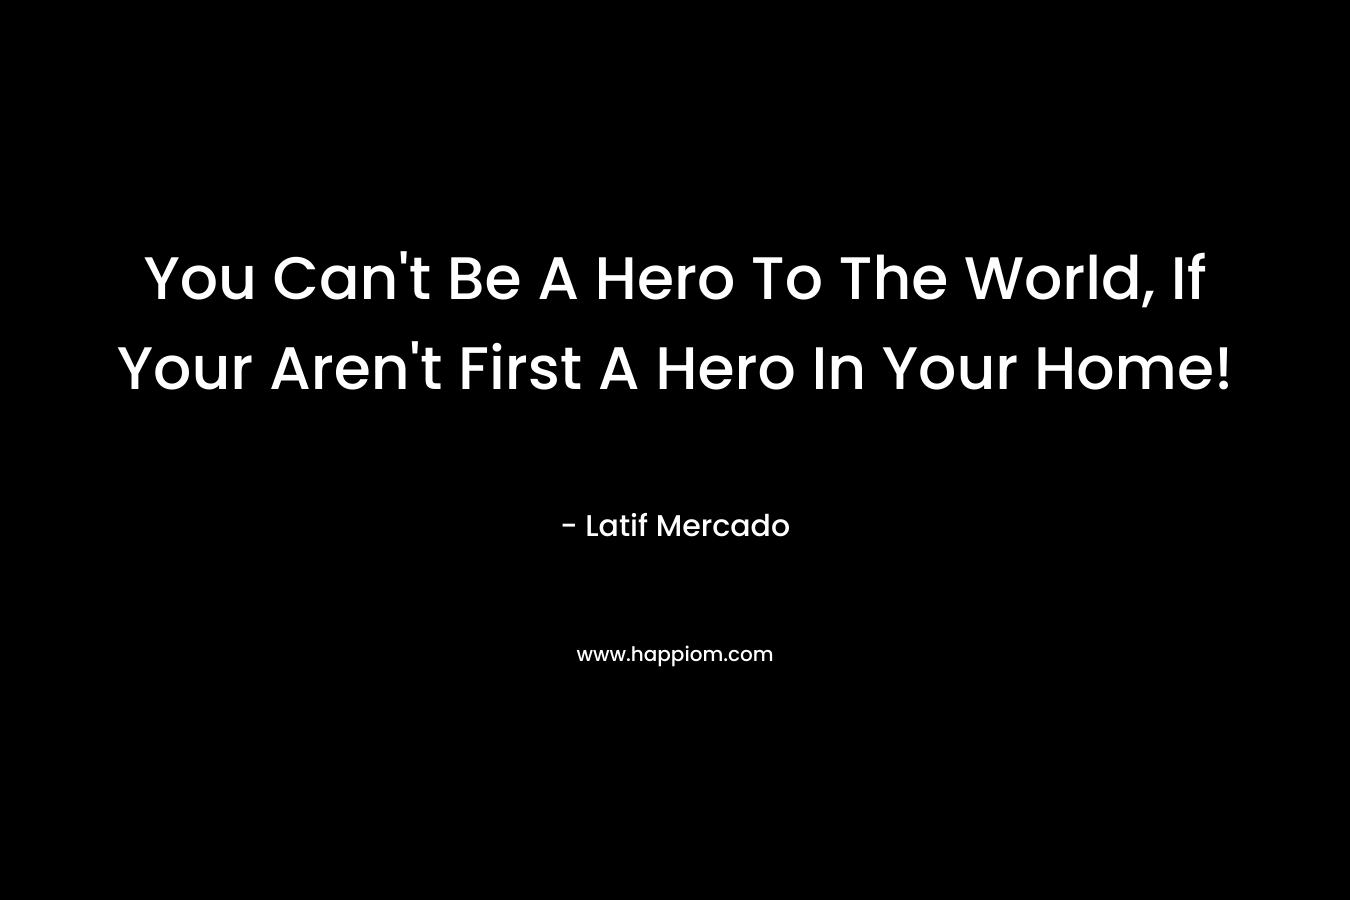 You Can't Be A Hero To The World, If Your Aren't First A Hero In Your Home!